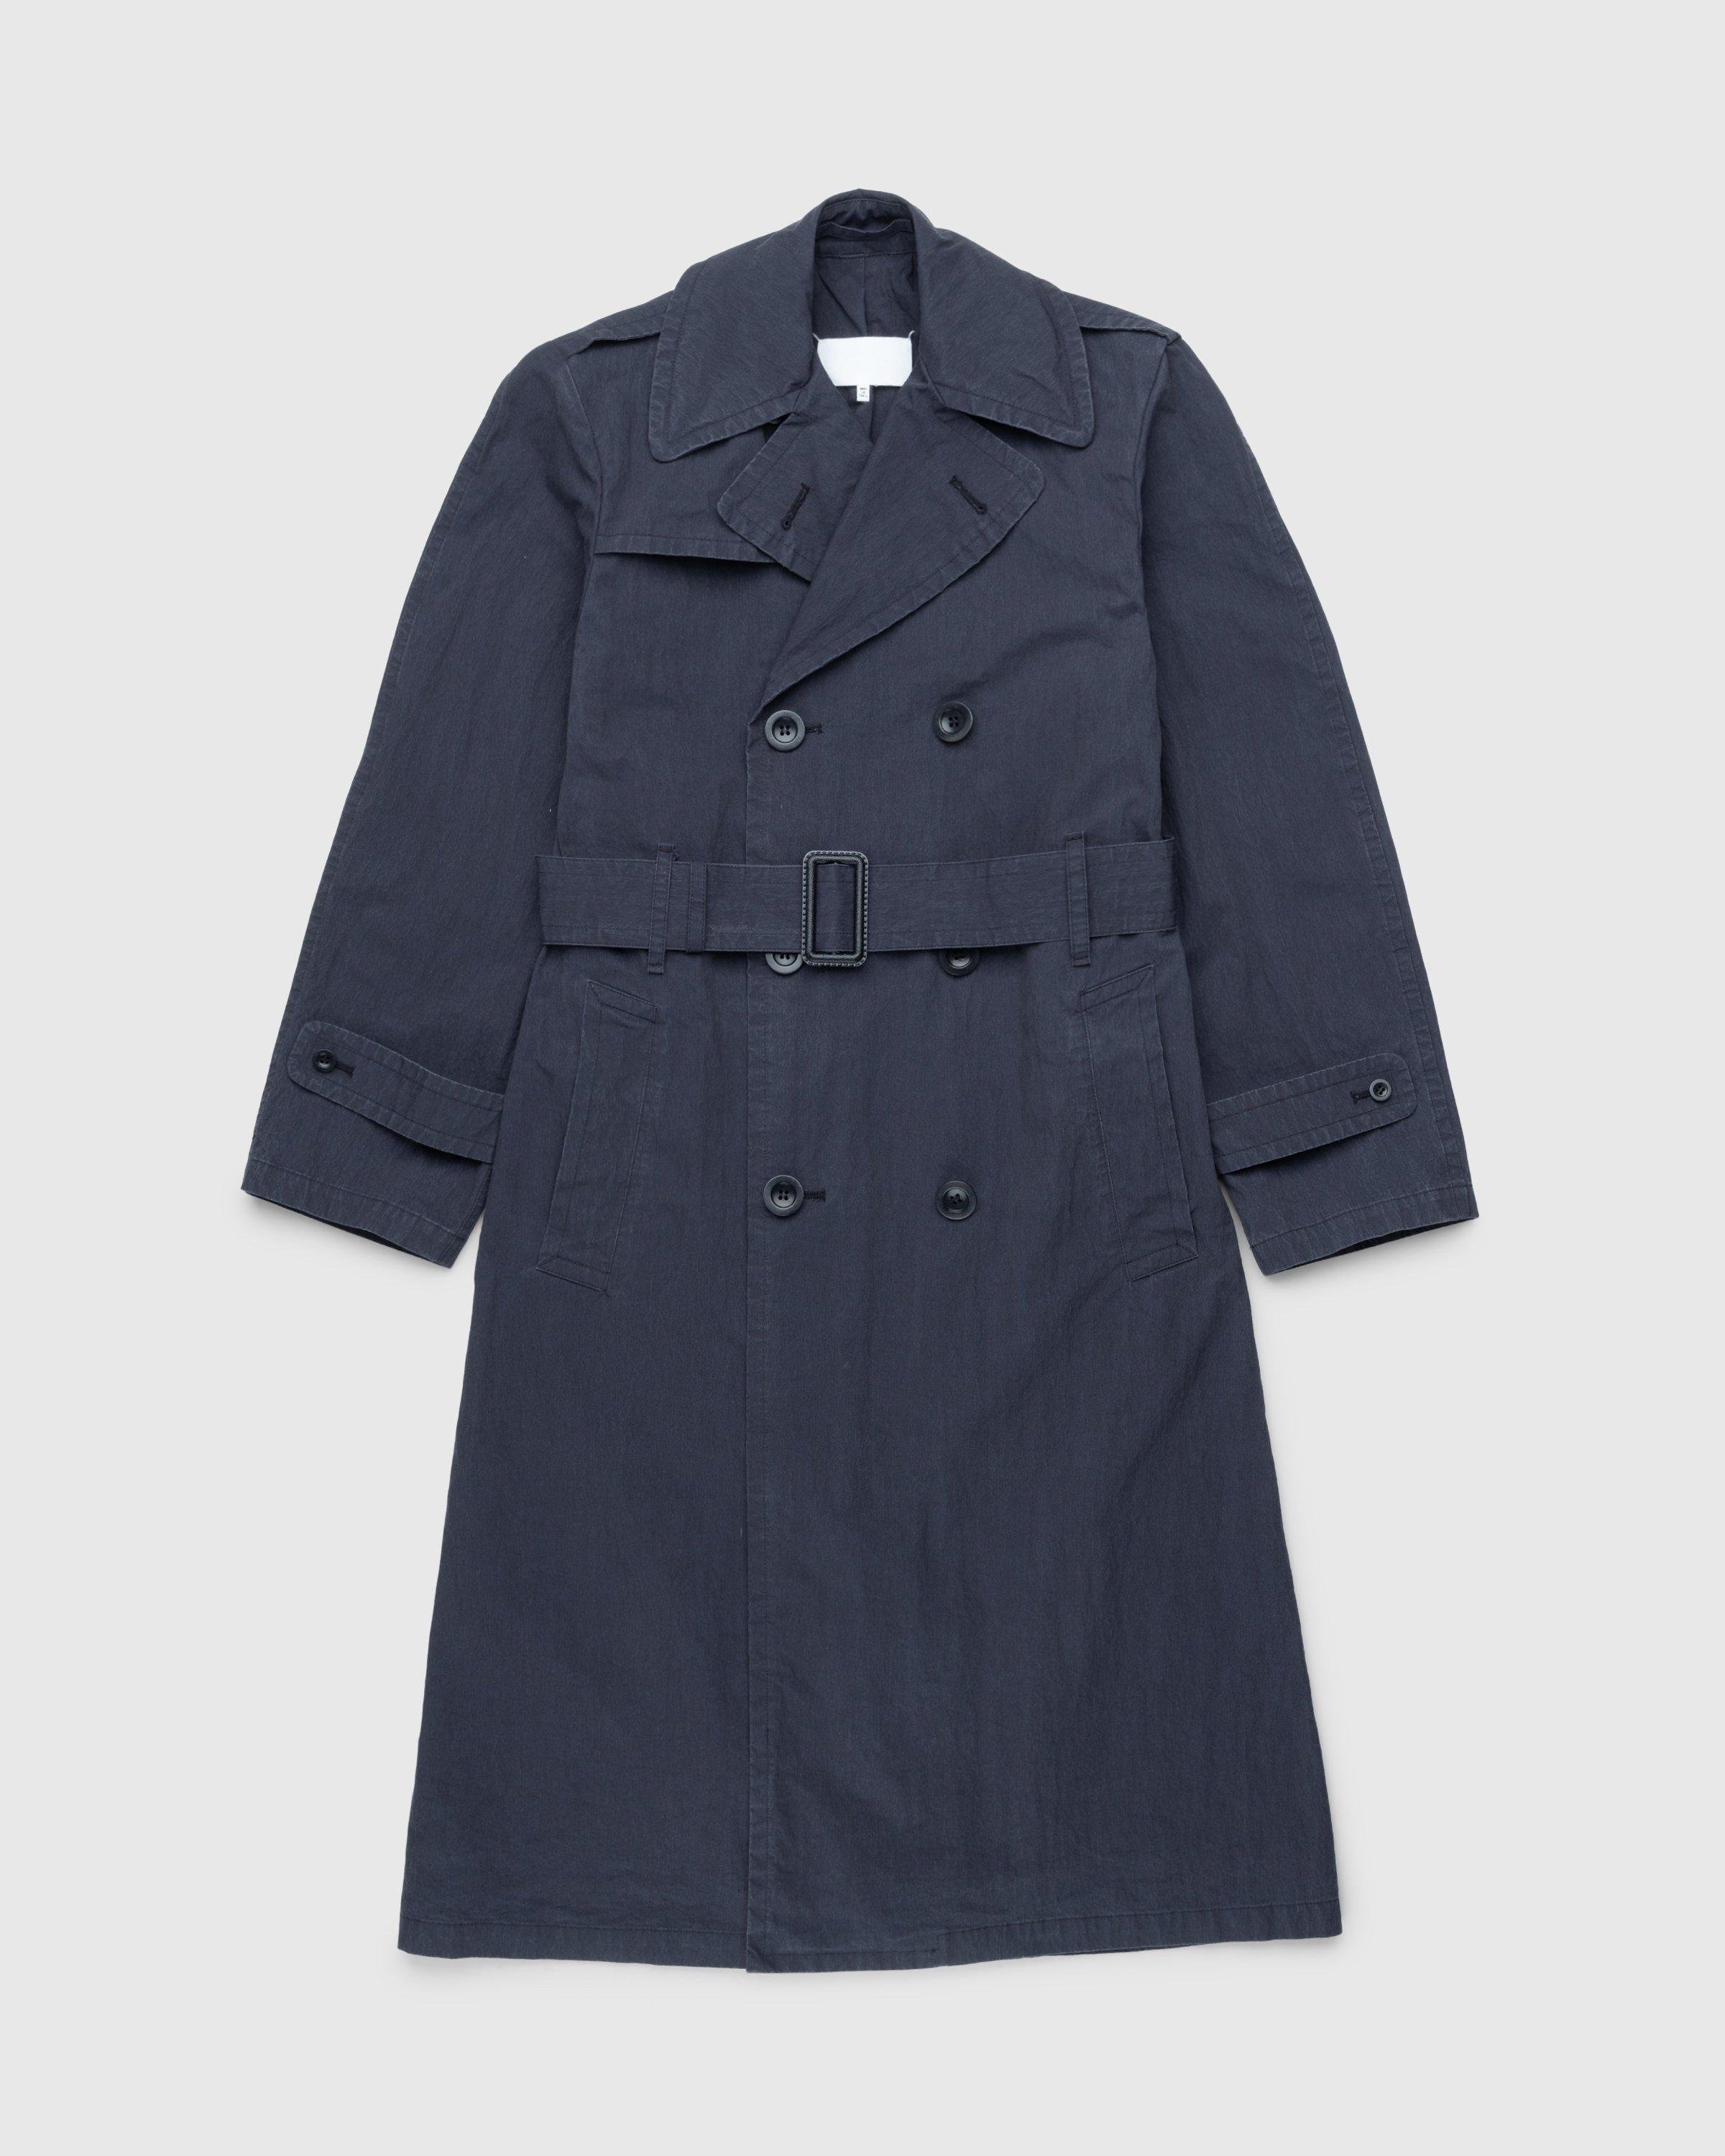 Maison MargielaDouble-Breasted Trench Coat Black/Washed by HIGHSNOBIETY